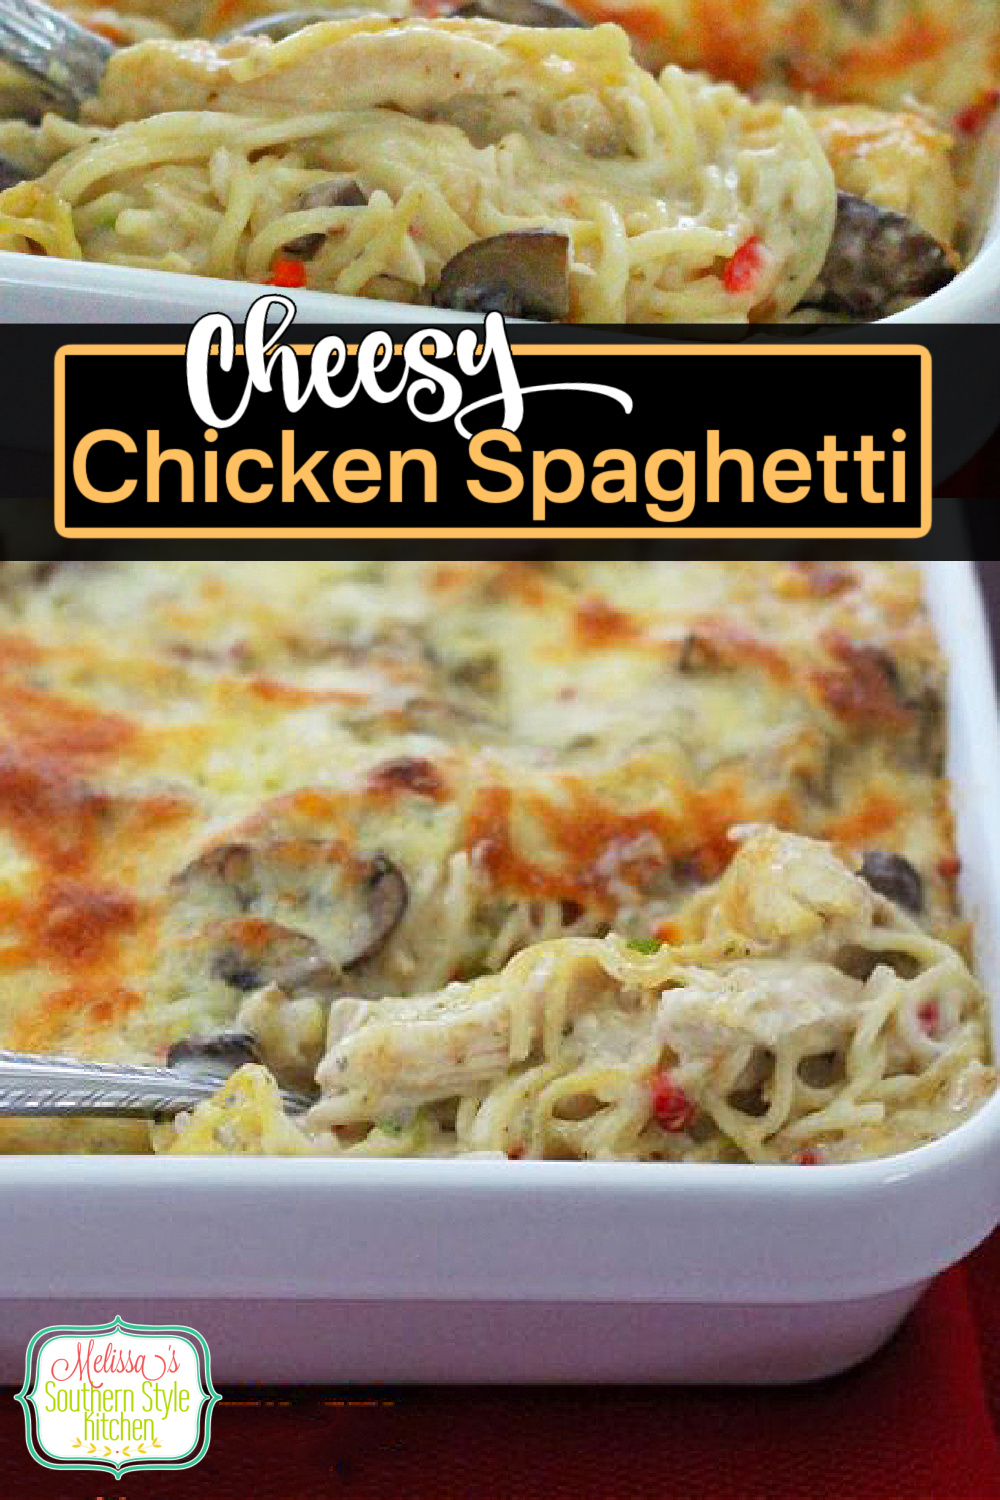 This delicious Cheesy Chicken Spaghetti features a creamy homemade sauce, tender pasta and chicken for a family friendly potluck meal #chickenspaghetti #cheesychickenspaghetti #spaghettirecipes #spaghetti #easychickenrecipes #casseroles #southernstylespaghetti #spaghetticasseroles